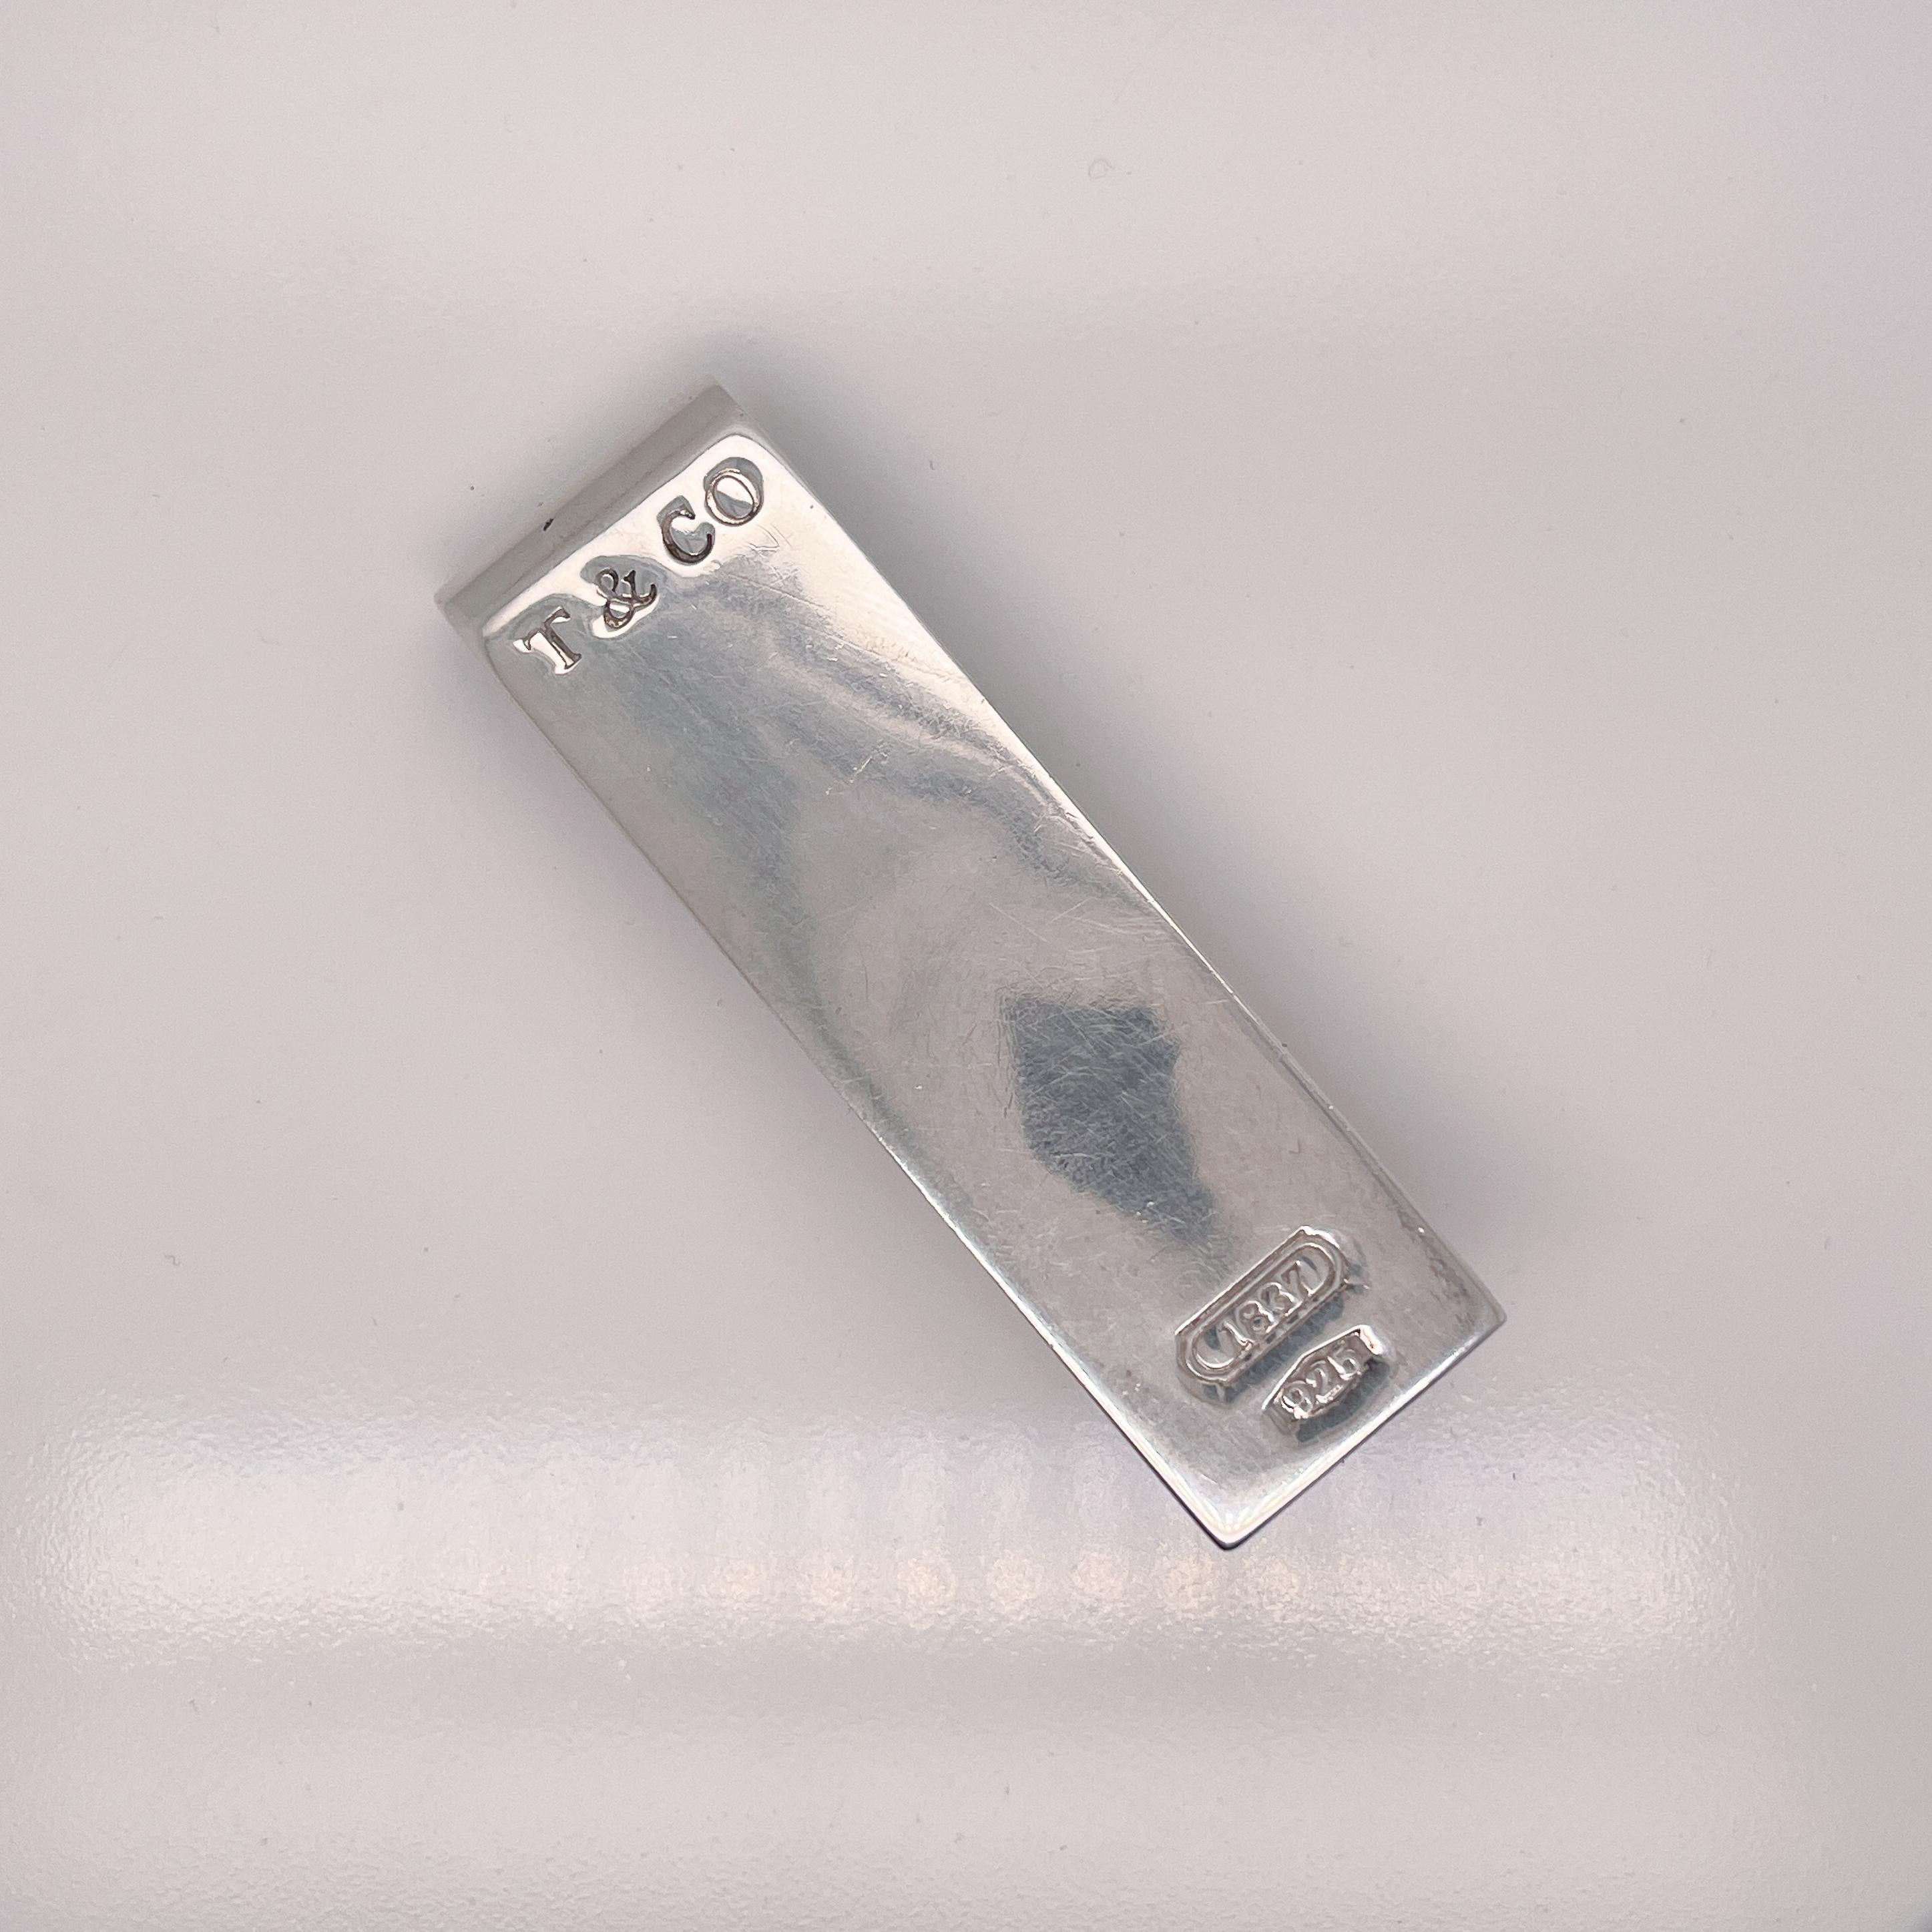 A fine sterling silver money clip.

By Tiffany & Co. 

Crafted with an original symbol from the Tiffany Shop, the Tiffany 1837 Makers Collection honors Tiffany’s legacy of expert craftsmanship through a modern lens.

Simply a great money clip from